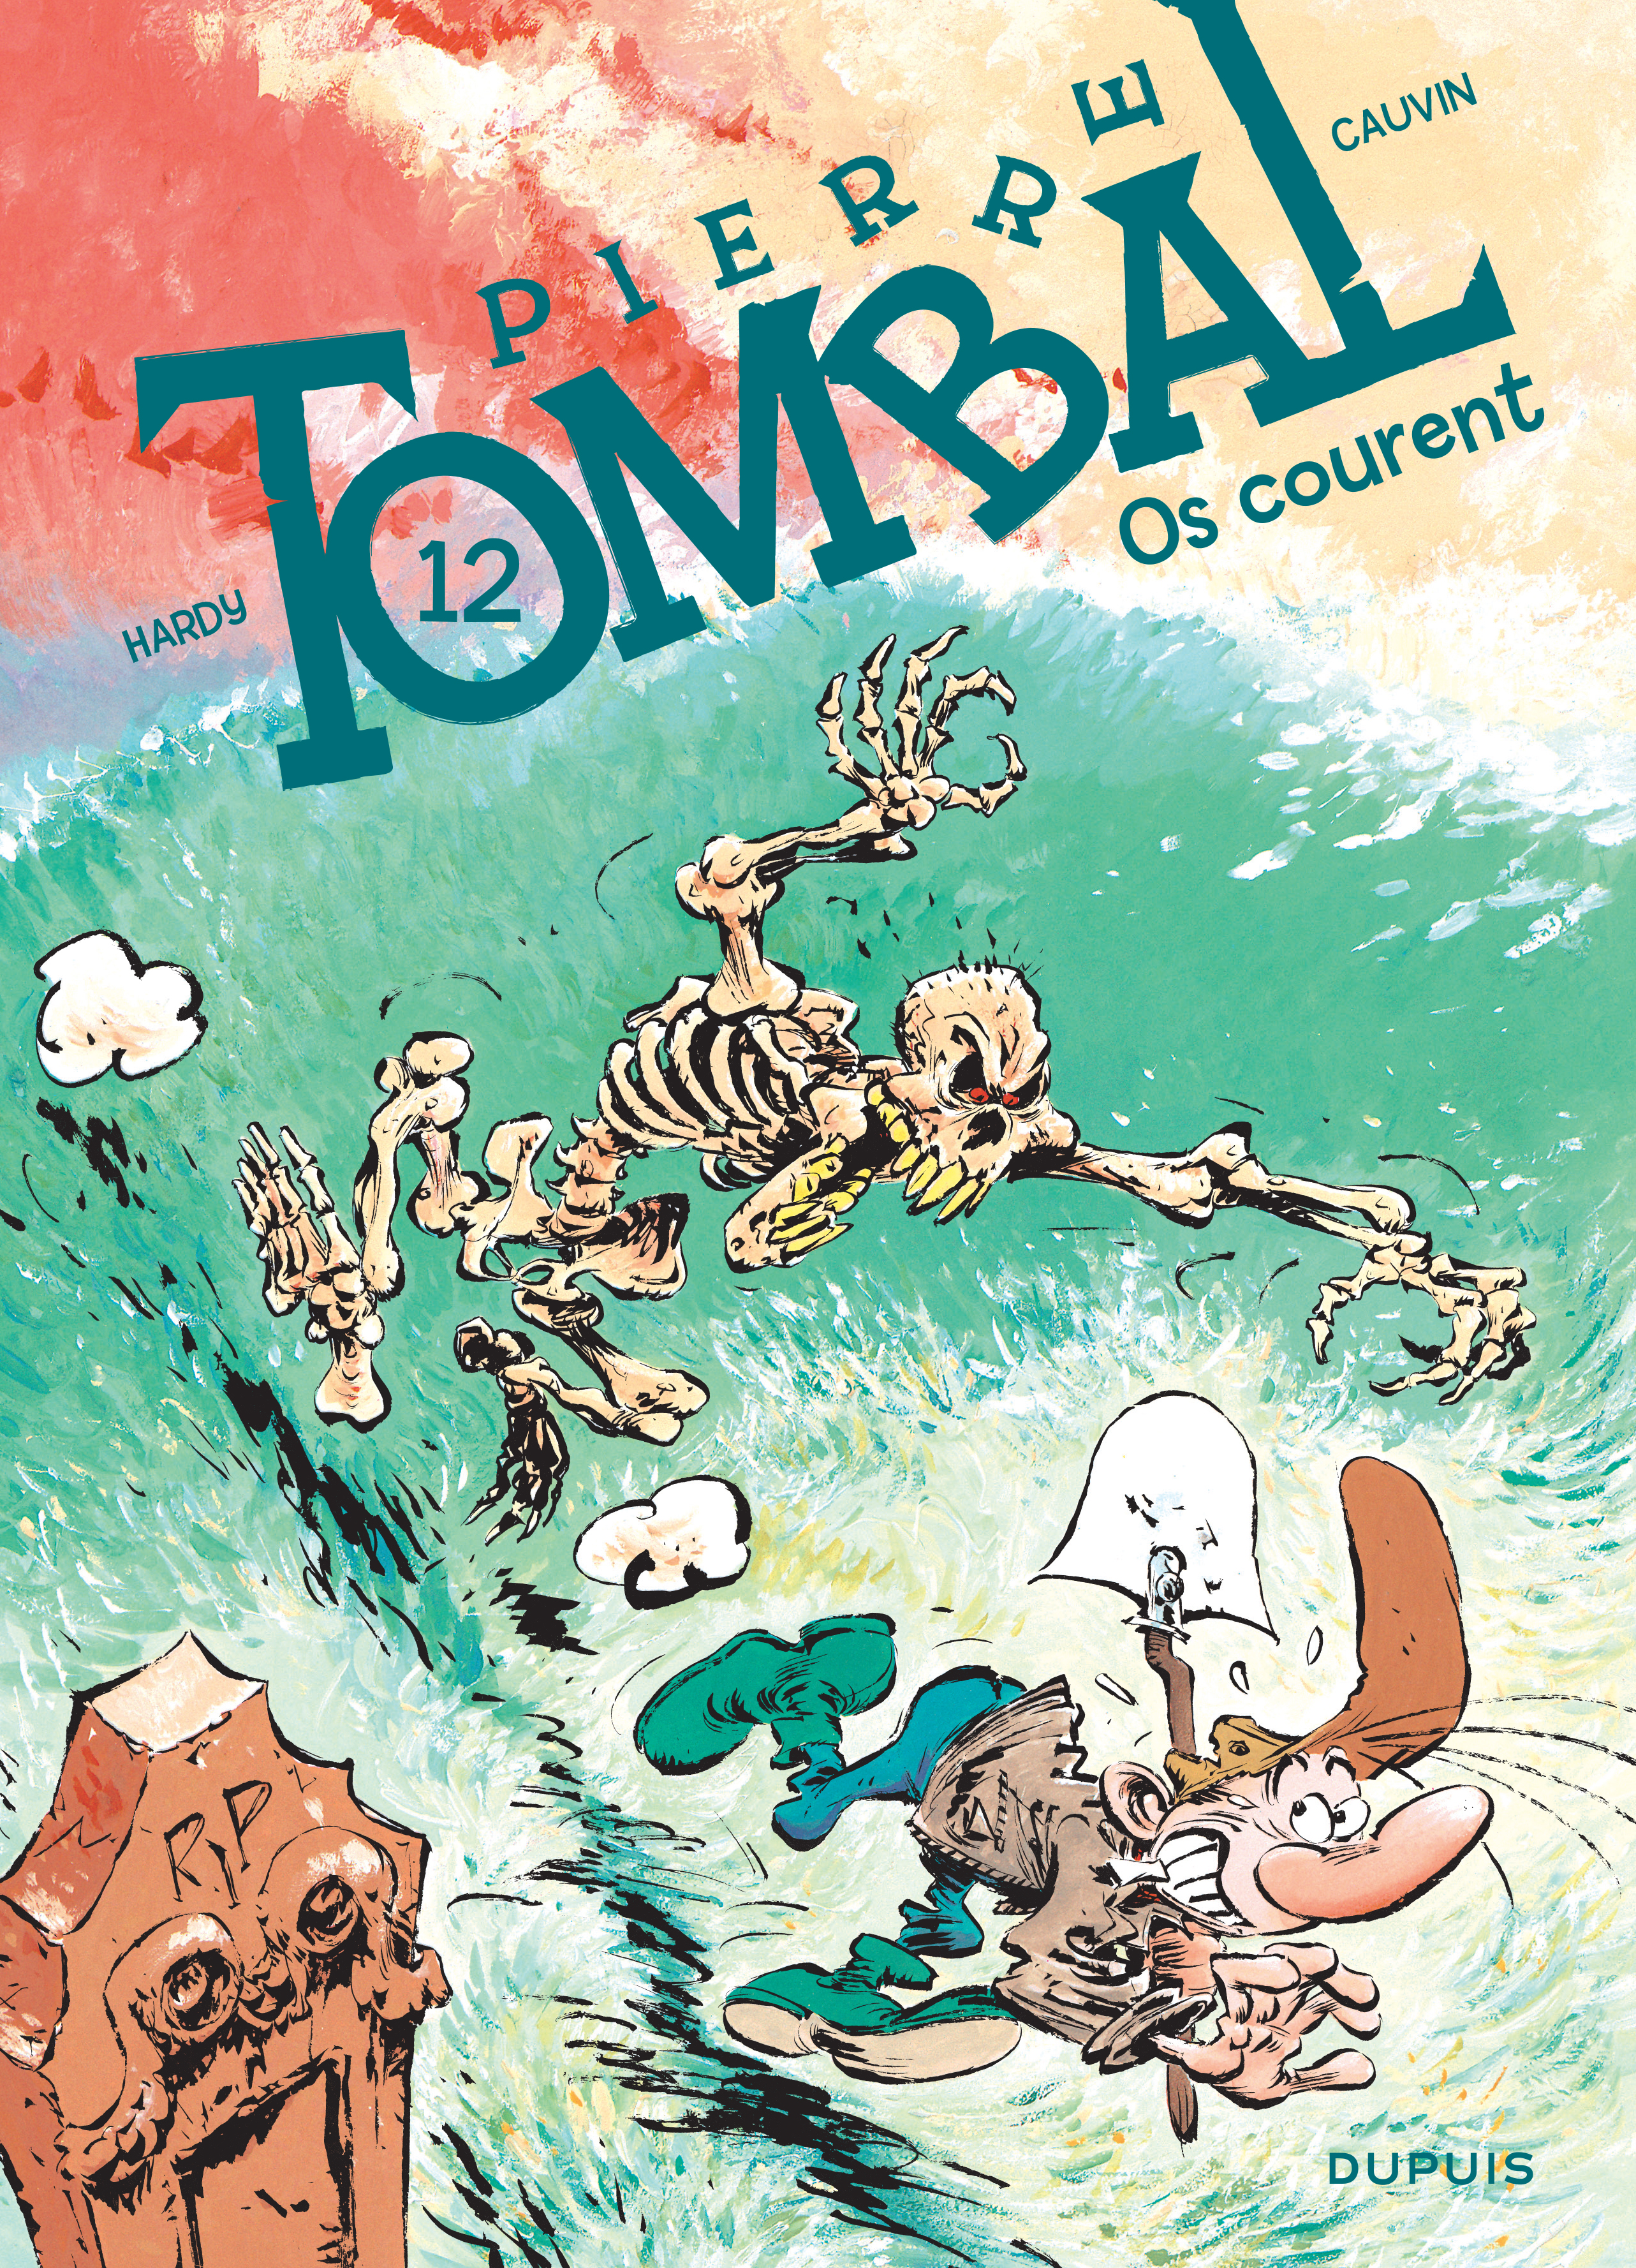 Pierre Tombal – Tome 12 – Os courent - couv